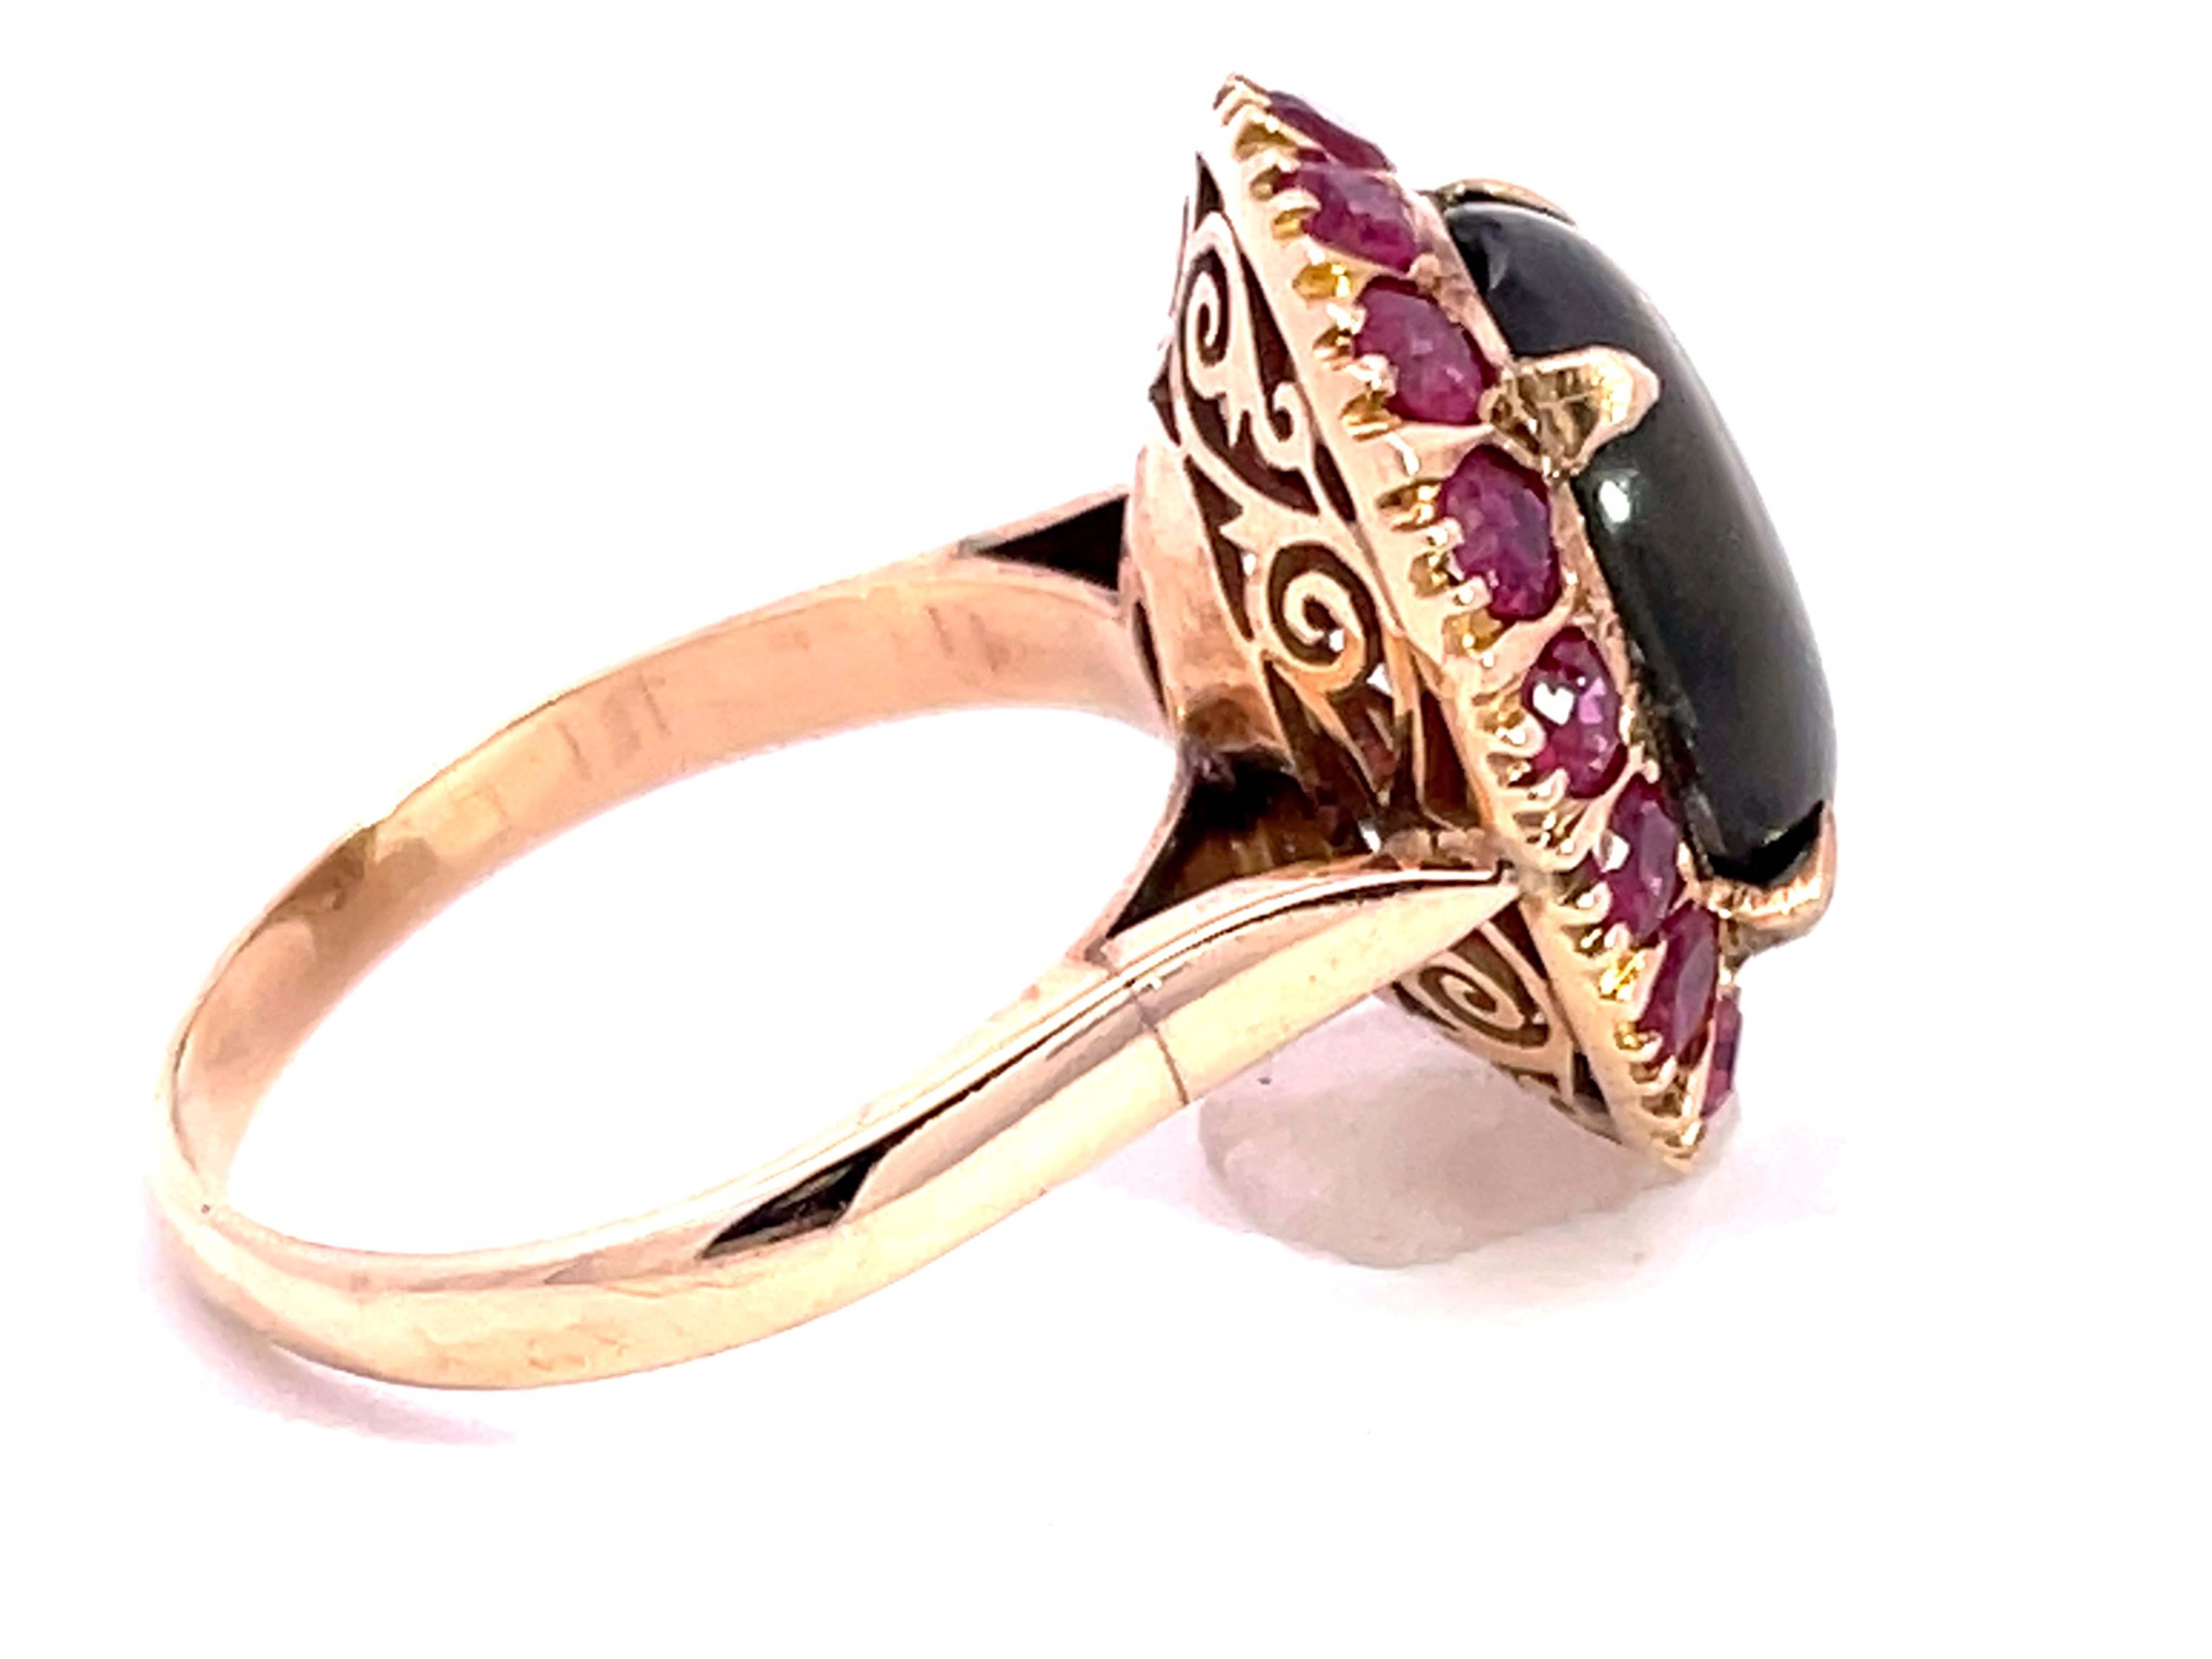 Star Sapphire Ruby Halo Ring in 18k Yellow Gold For Sale 2